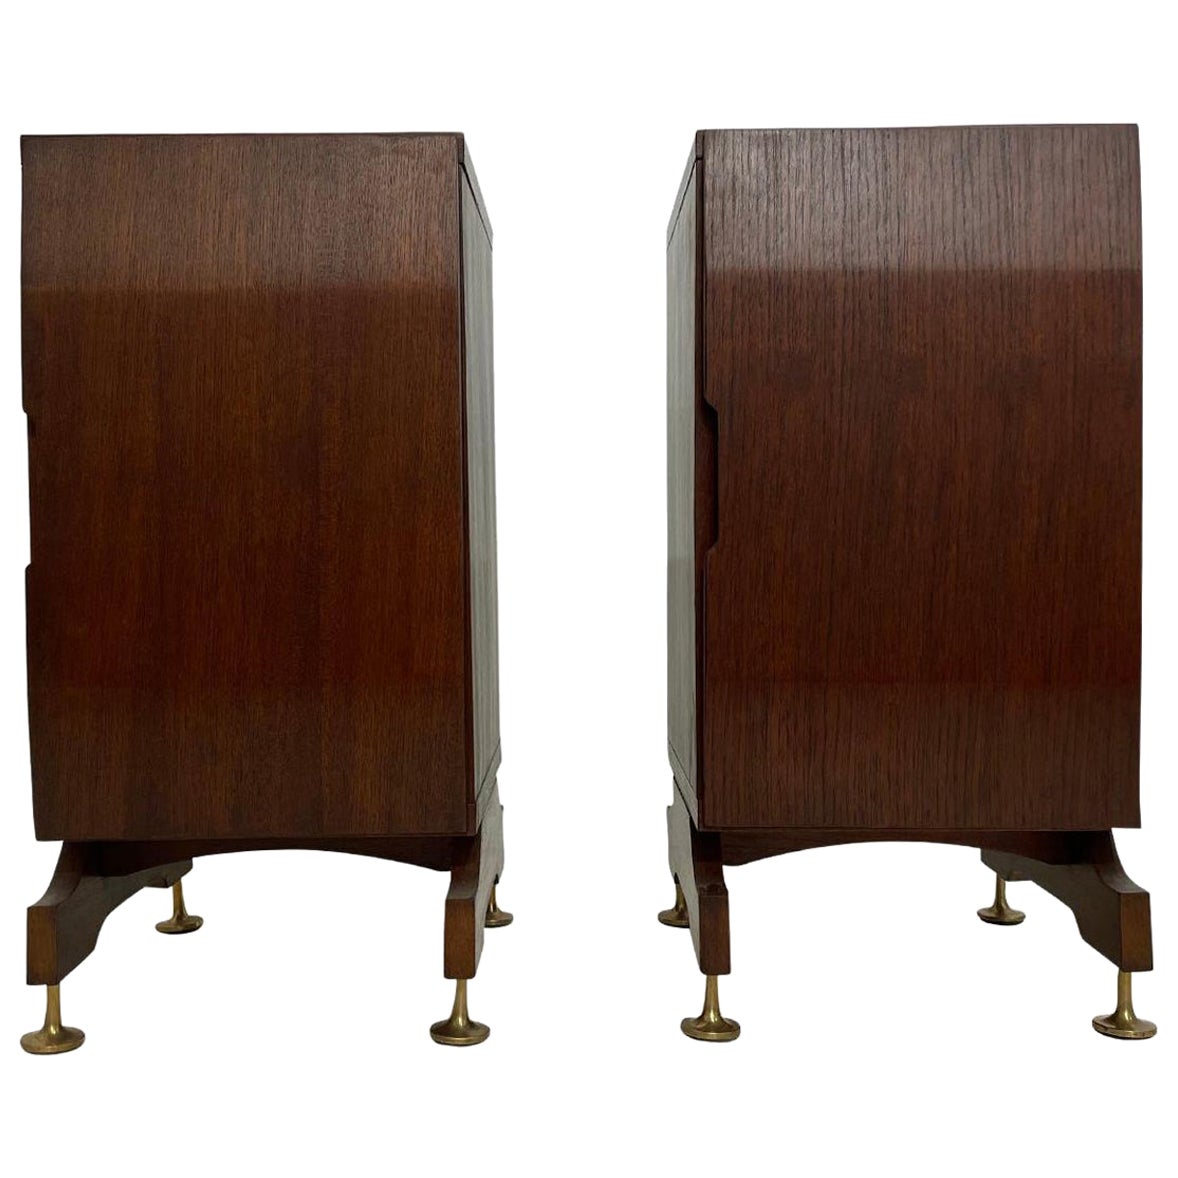 20th Century Italian Mid-Century Pair of Walnut Nightstands, Vintage Side Tables For Sale